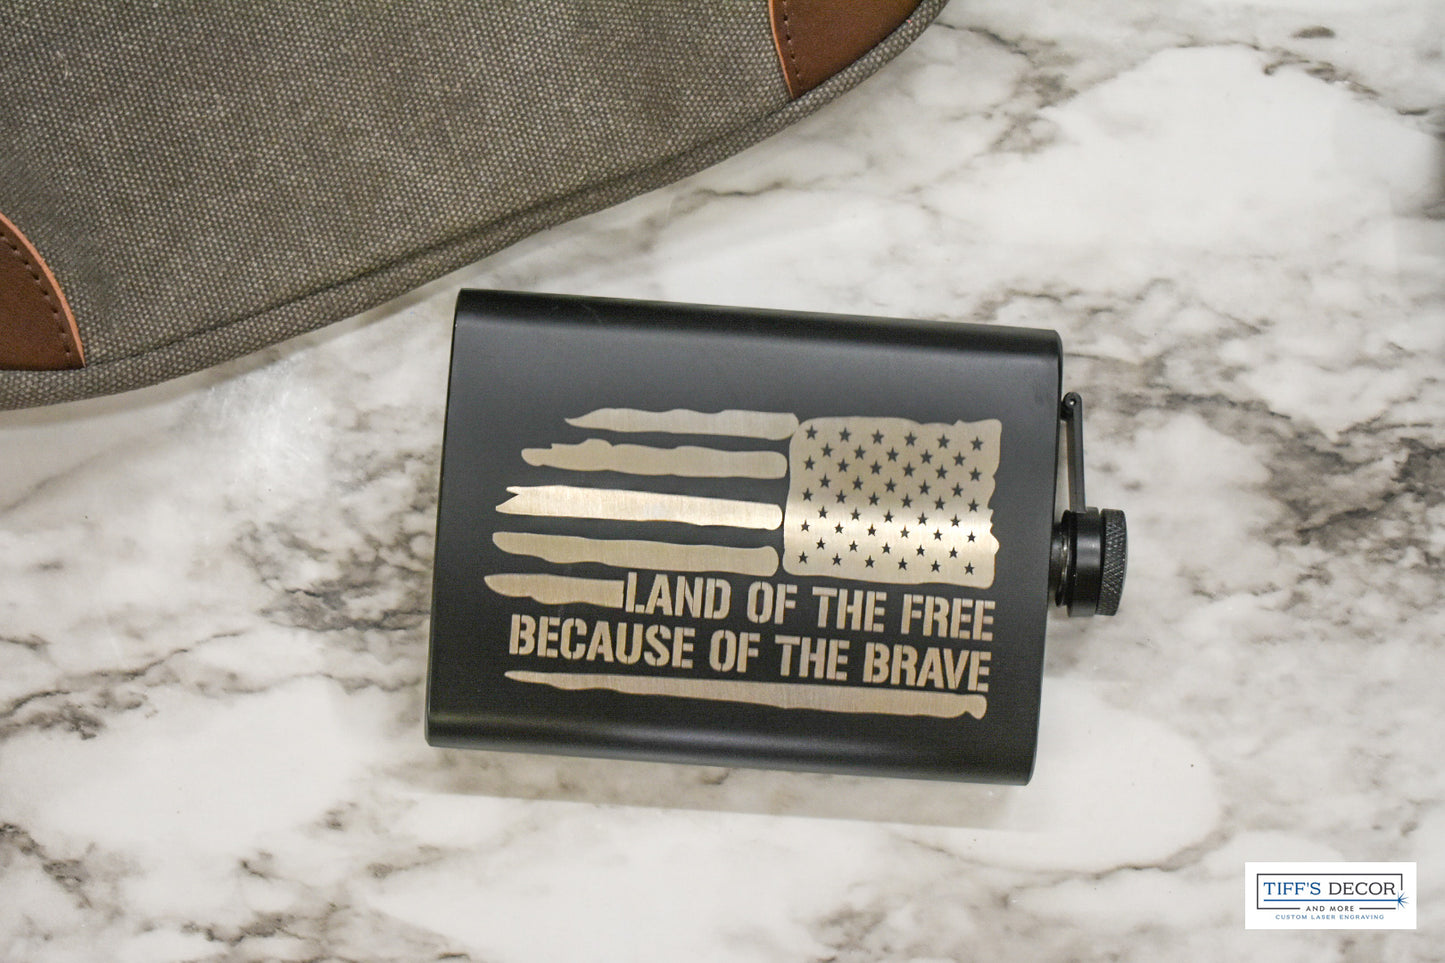 Powder coated stainless steel flask